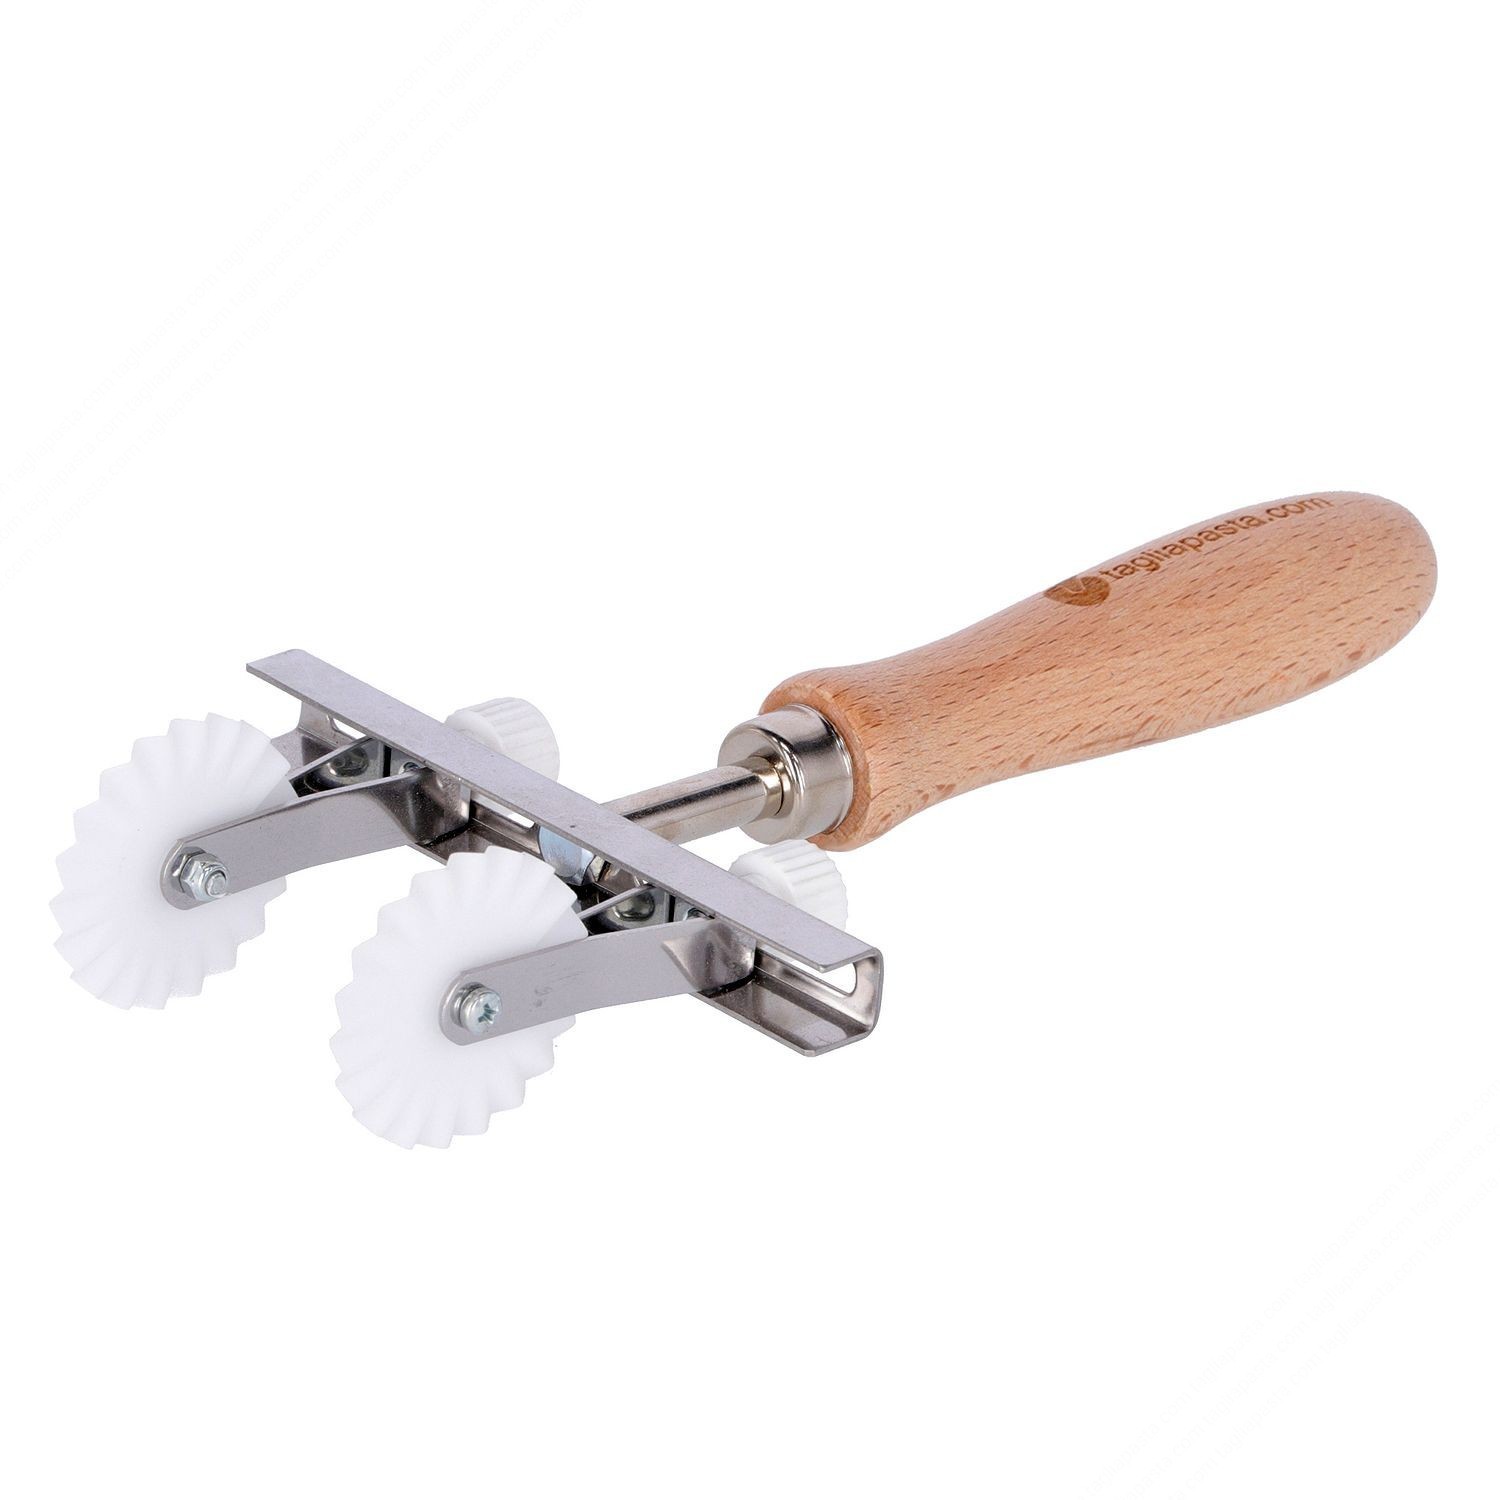 Straight Pastry / Pasta Wheel Cutter with Aluminium Wheel and